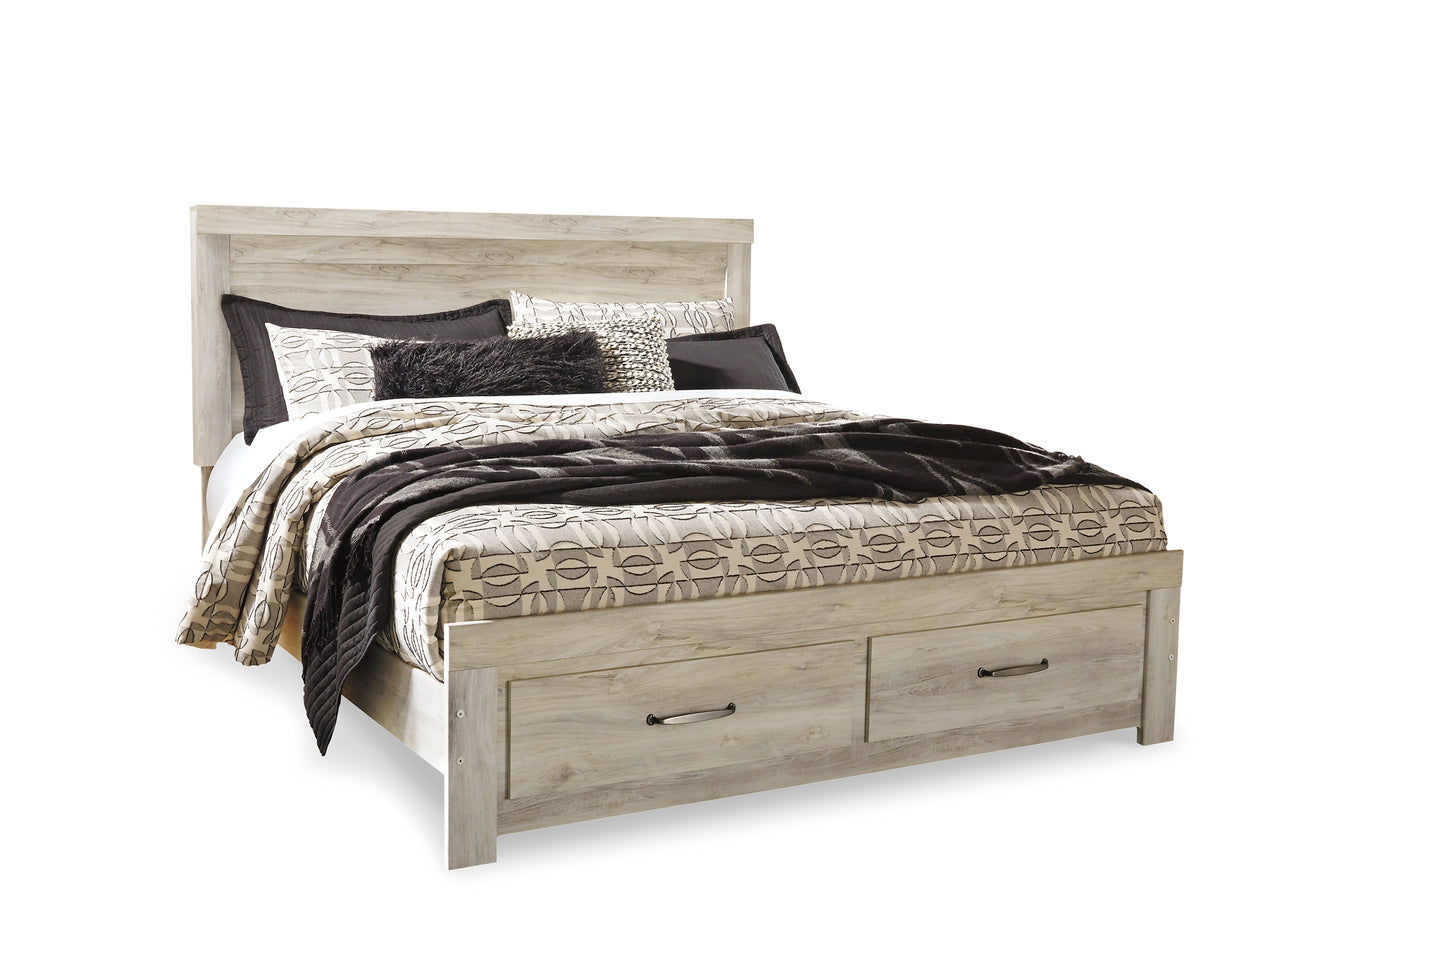 Bellaby Queen Platform Bed with 2 Storage Drawers with Mirrored Dresser, Chest and 2 Nightstands JB's Furniture  Home Furniture, Home Decor, Furniture Store